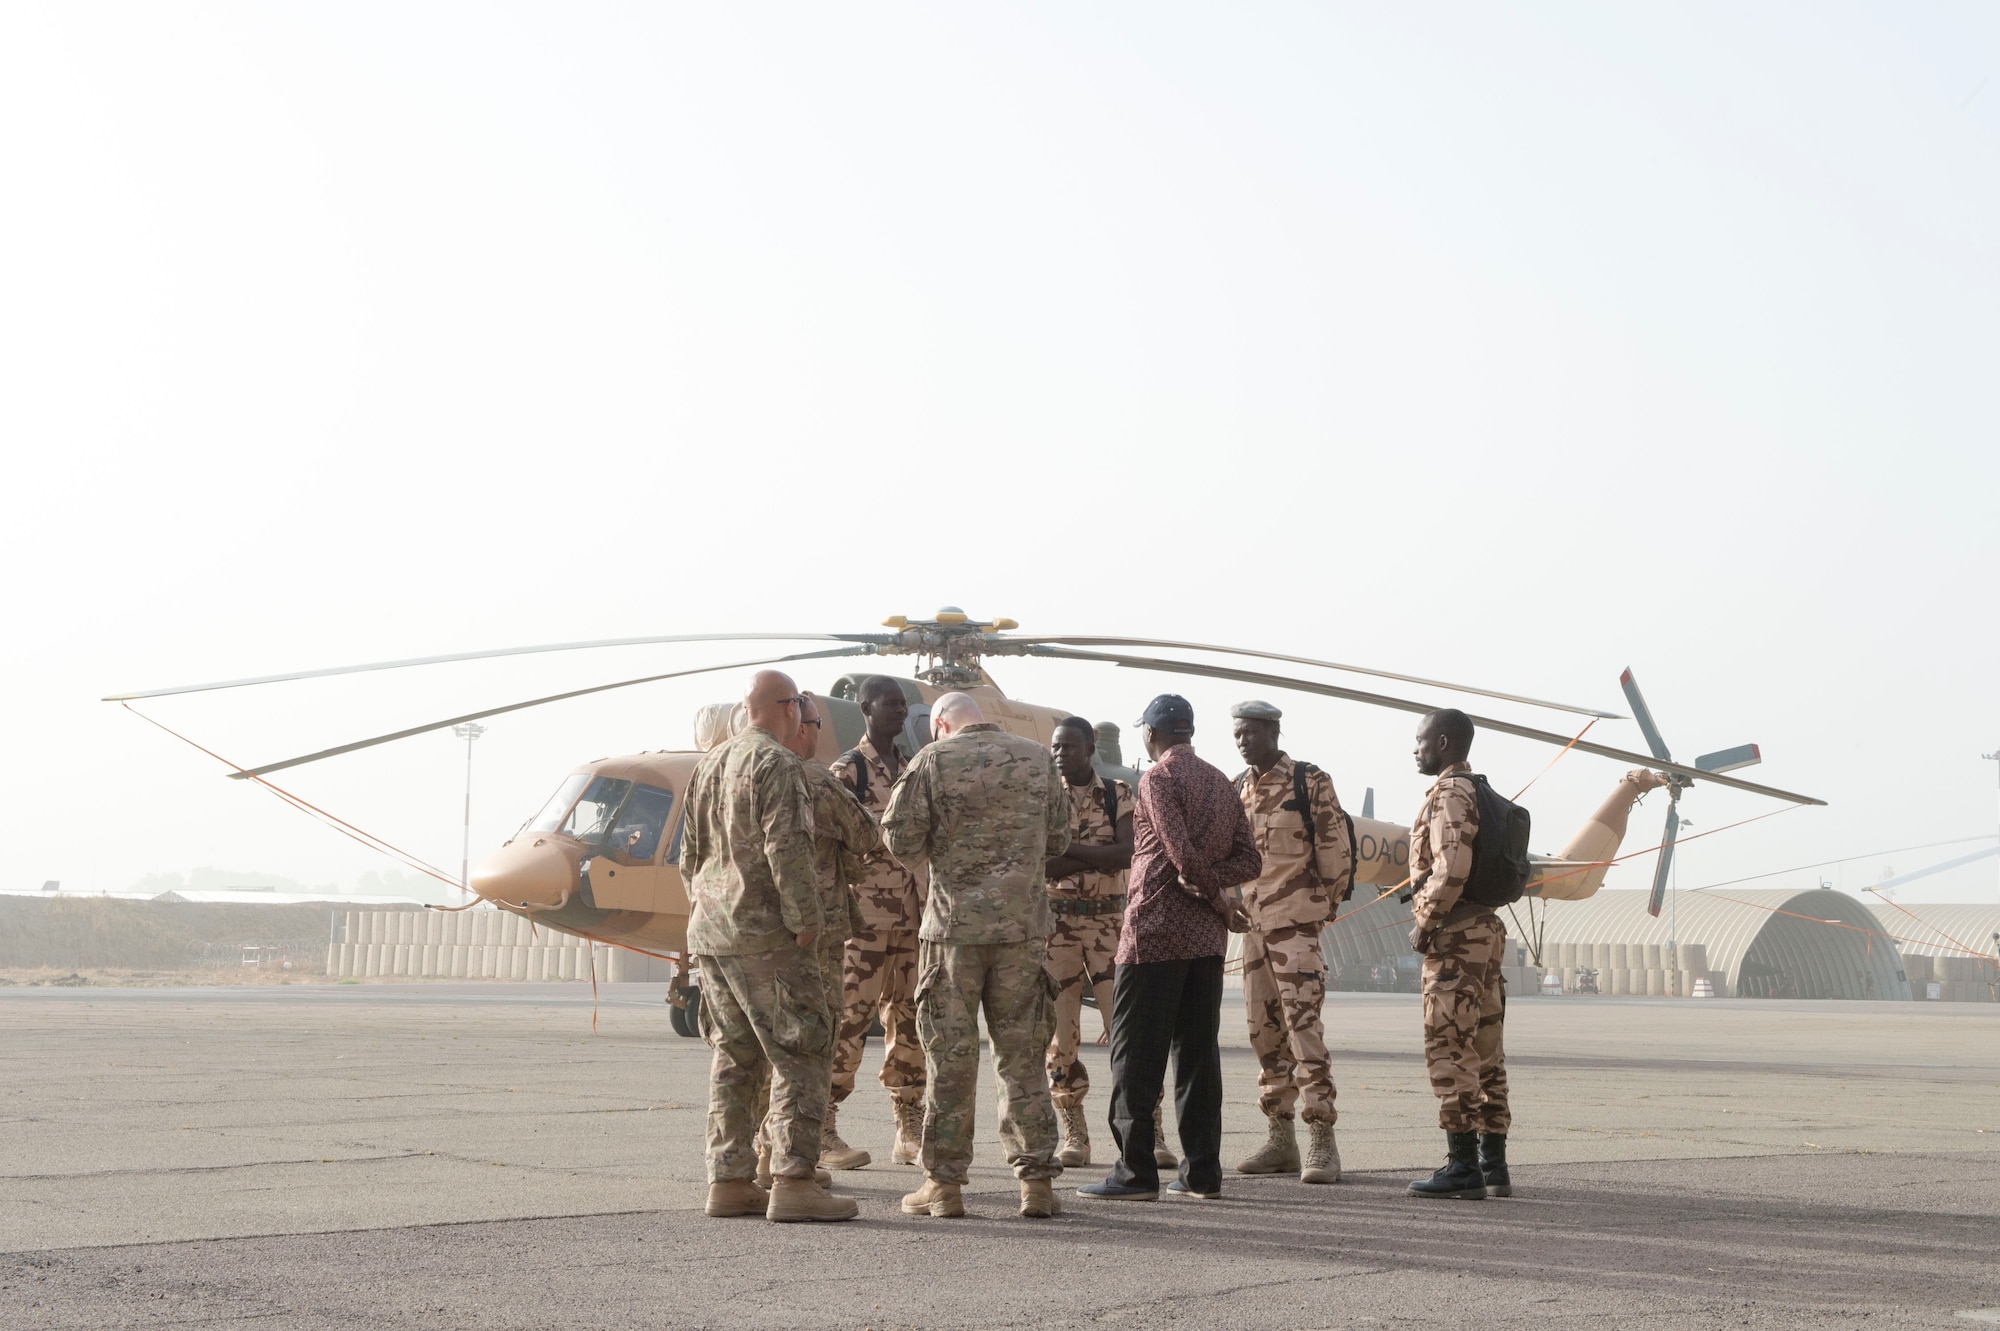 Members of the U.S. Air Force 818th Mobility Support Advisory Squadron go over airfield security procedures with members of the Chadian Air Force Airmen during a mobile training team event at Adjikossei Air Base, N'Djamena, Chad, January 16, 2018.